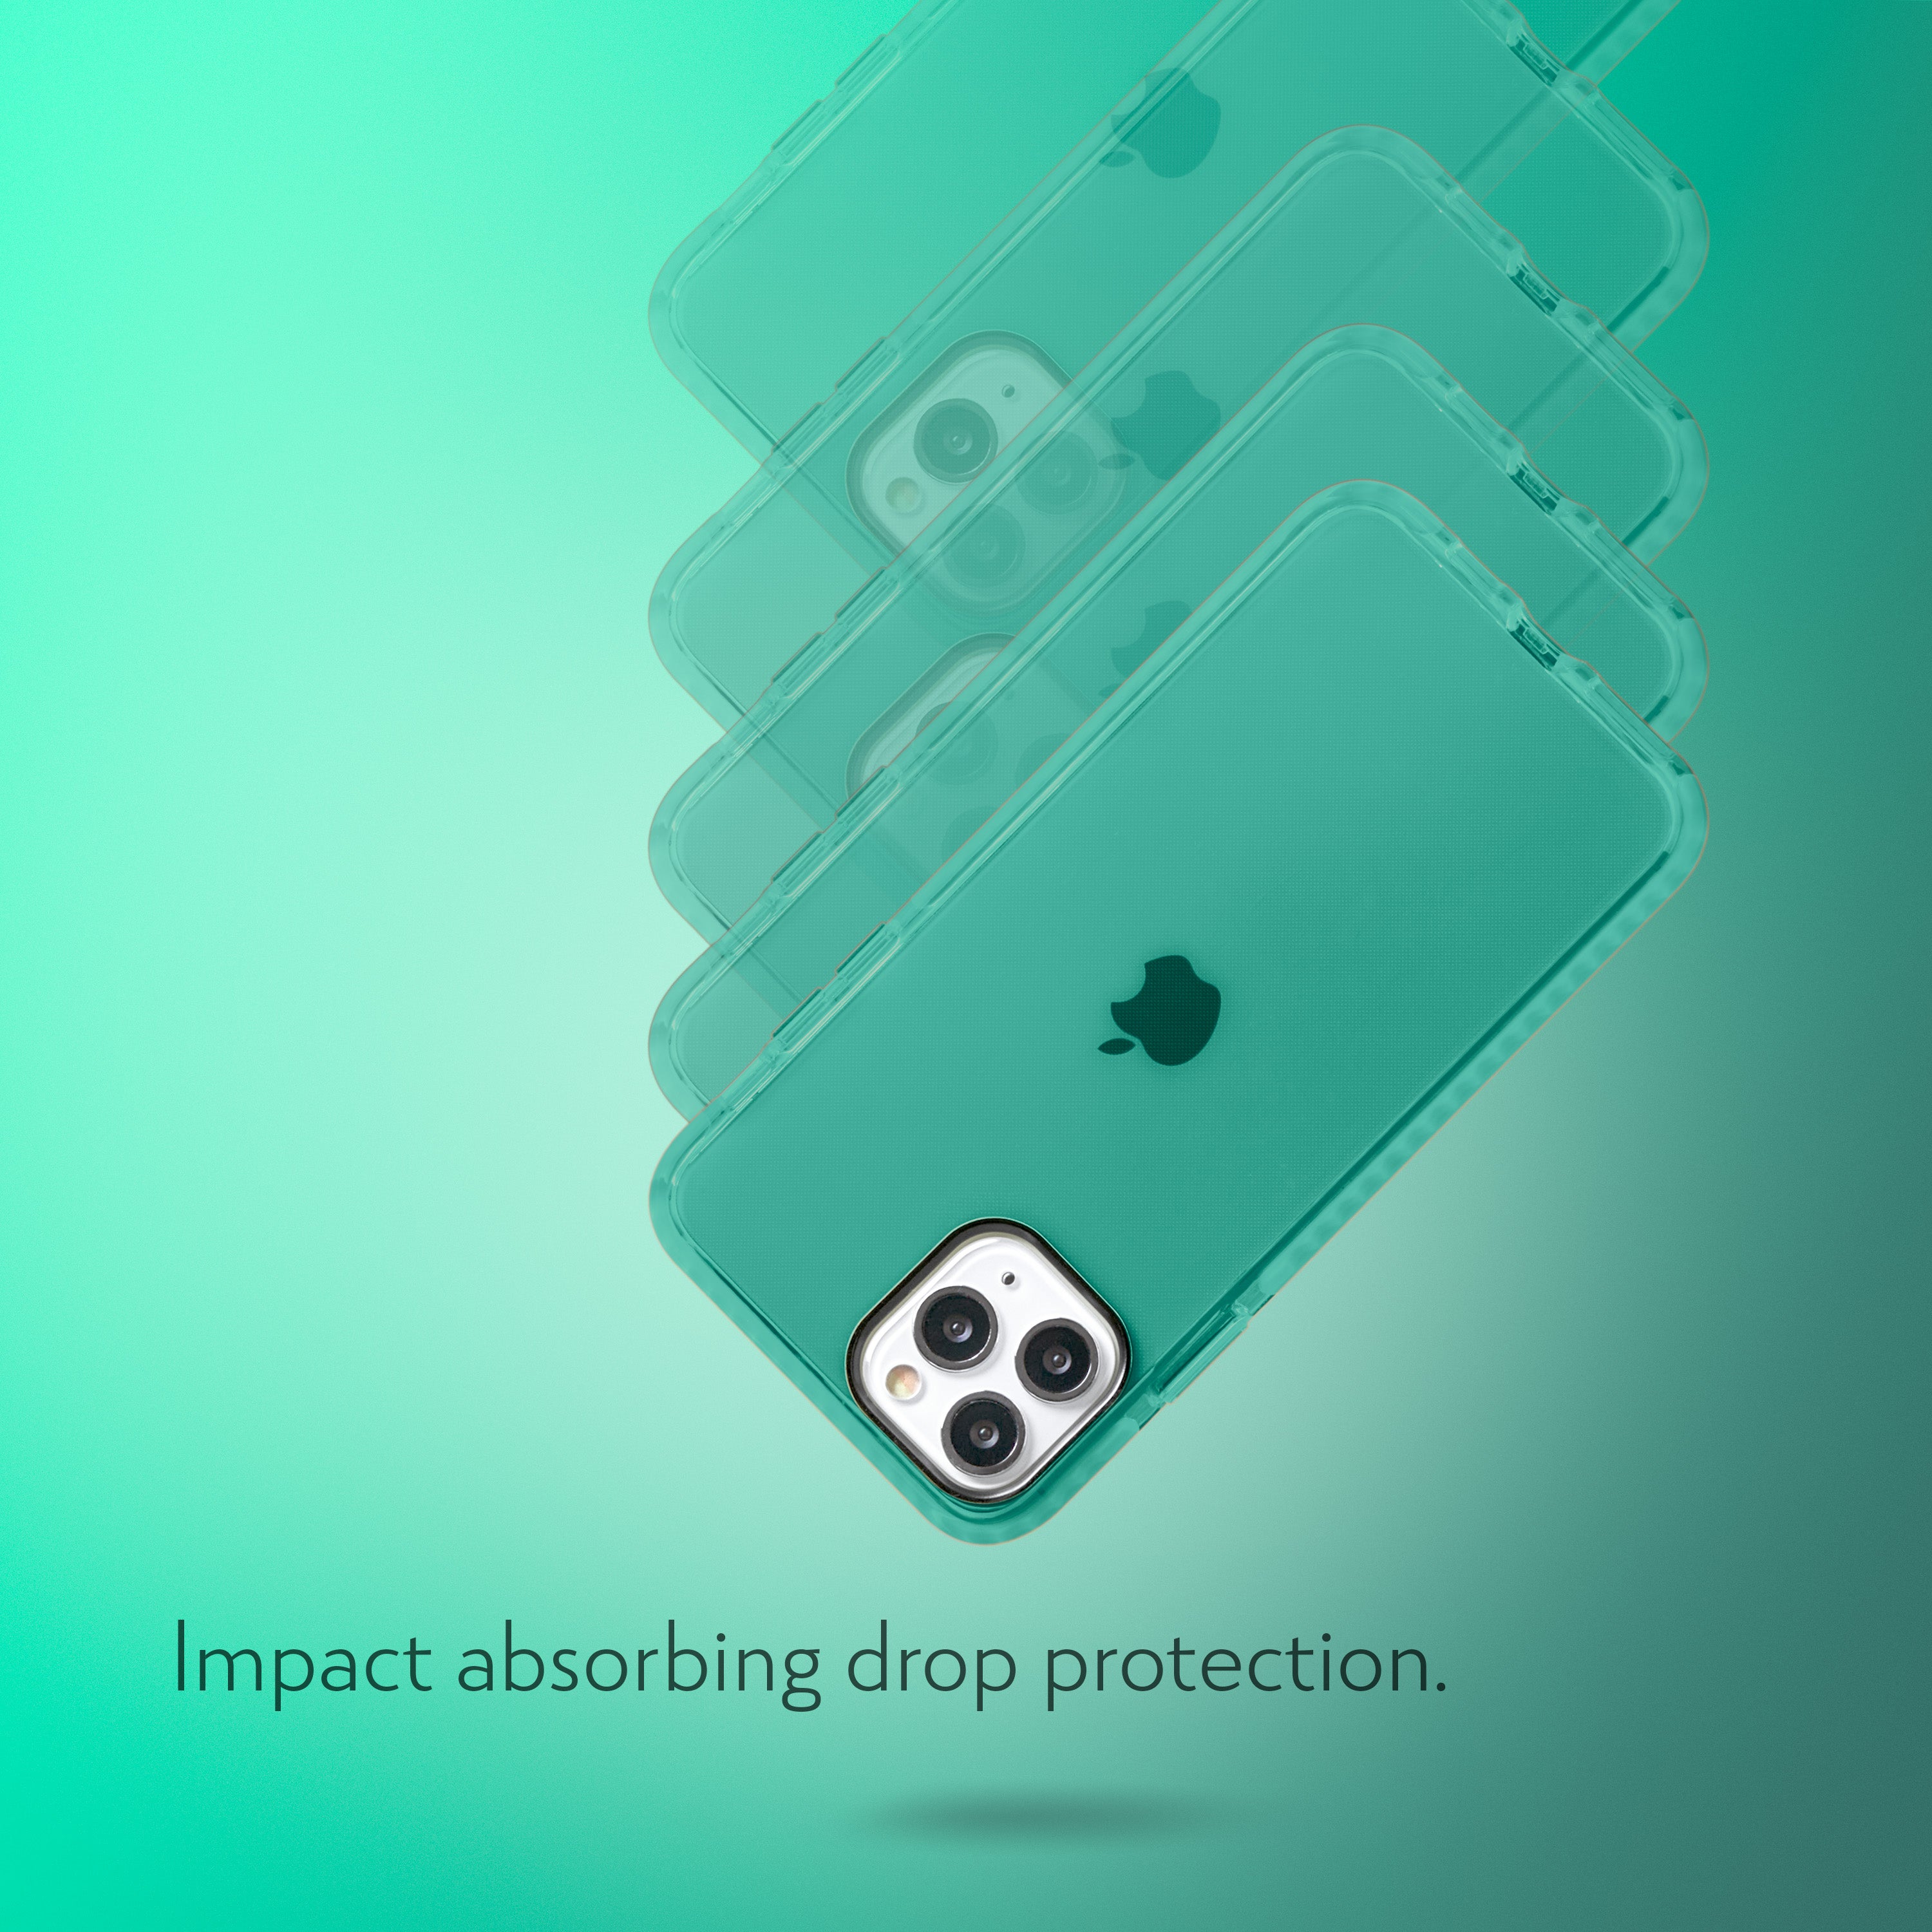 Barrier Case for iPhone 11 Pro - Polished Turquoise Blue